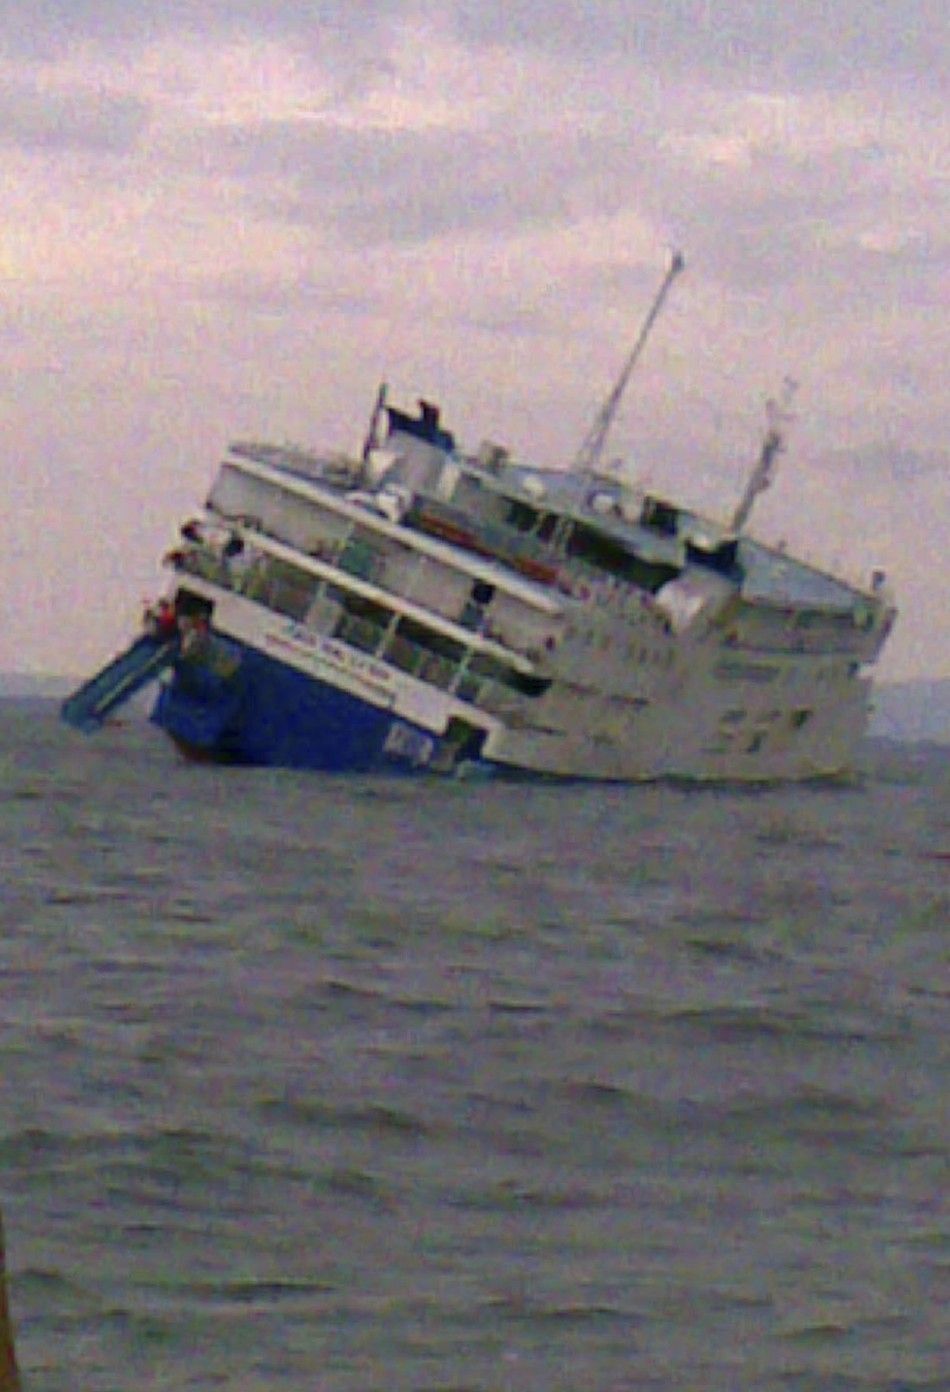 Cargo Ship Sinks in Seas of Philippines